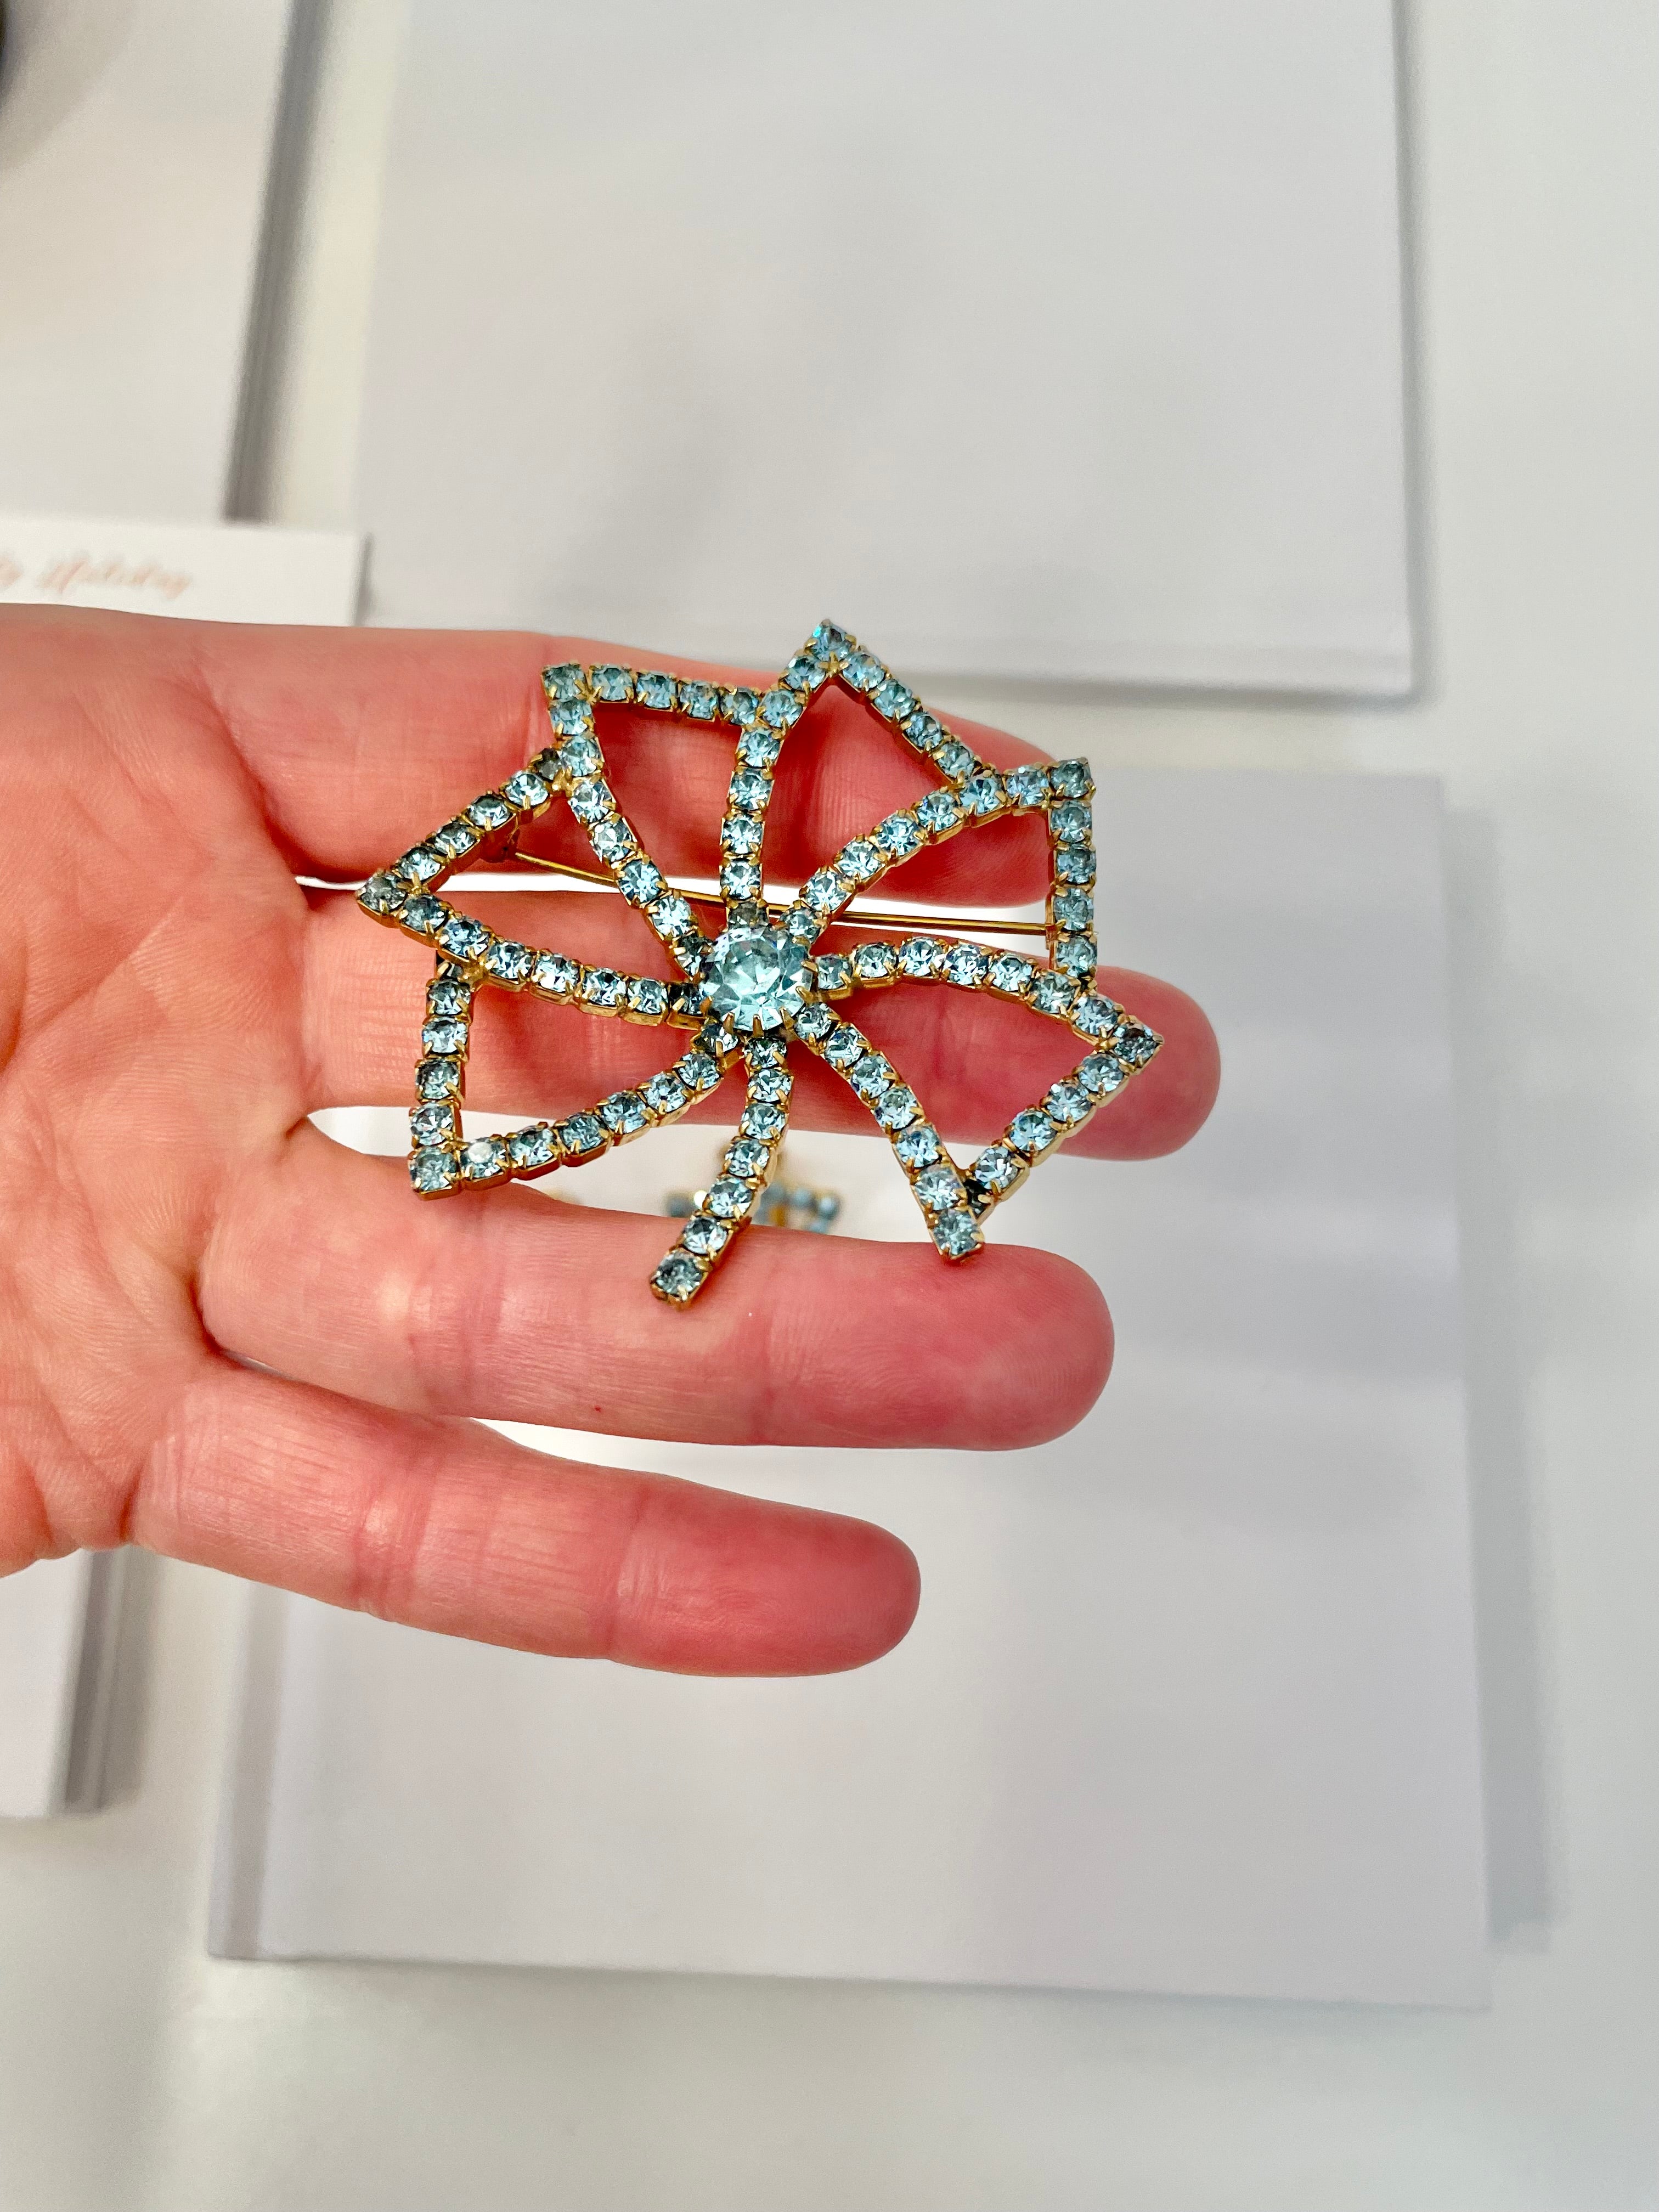 1960's Heiress and her love of a classy brooch set. This aqua glass brooch and earrings are truly divine.